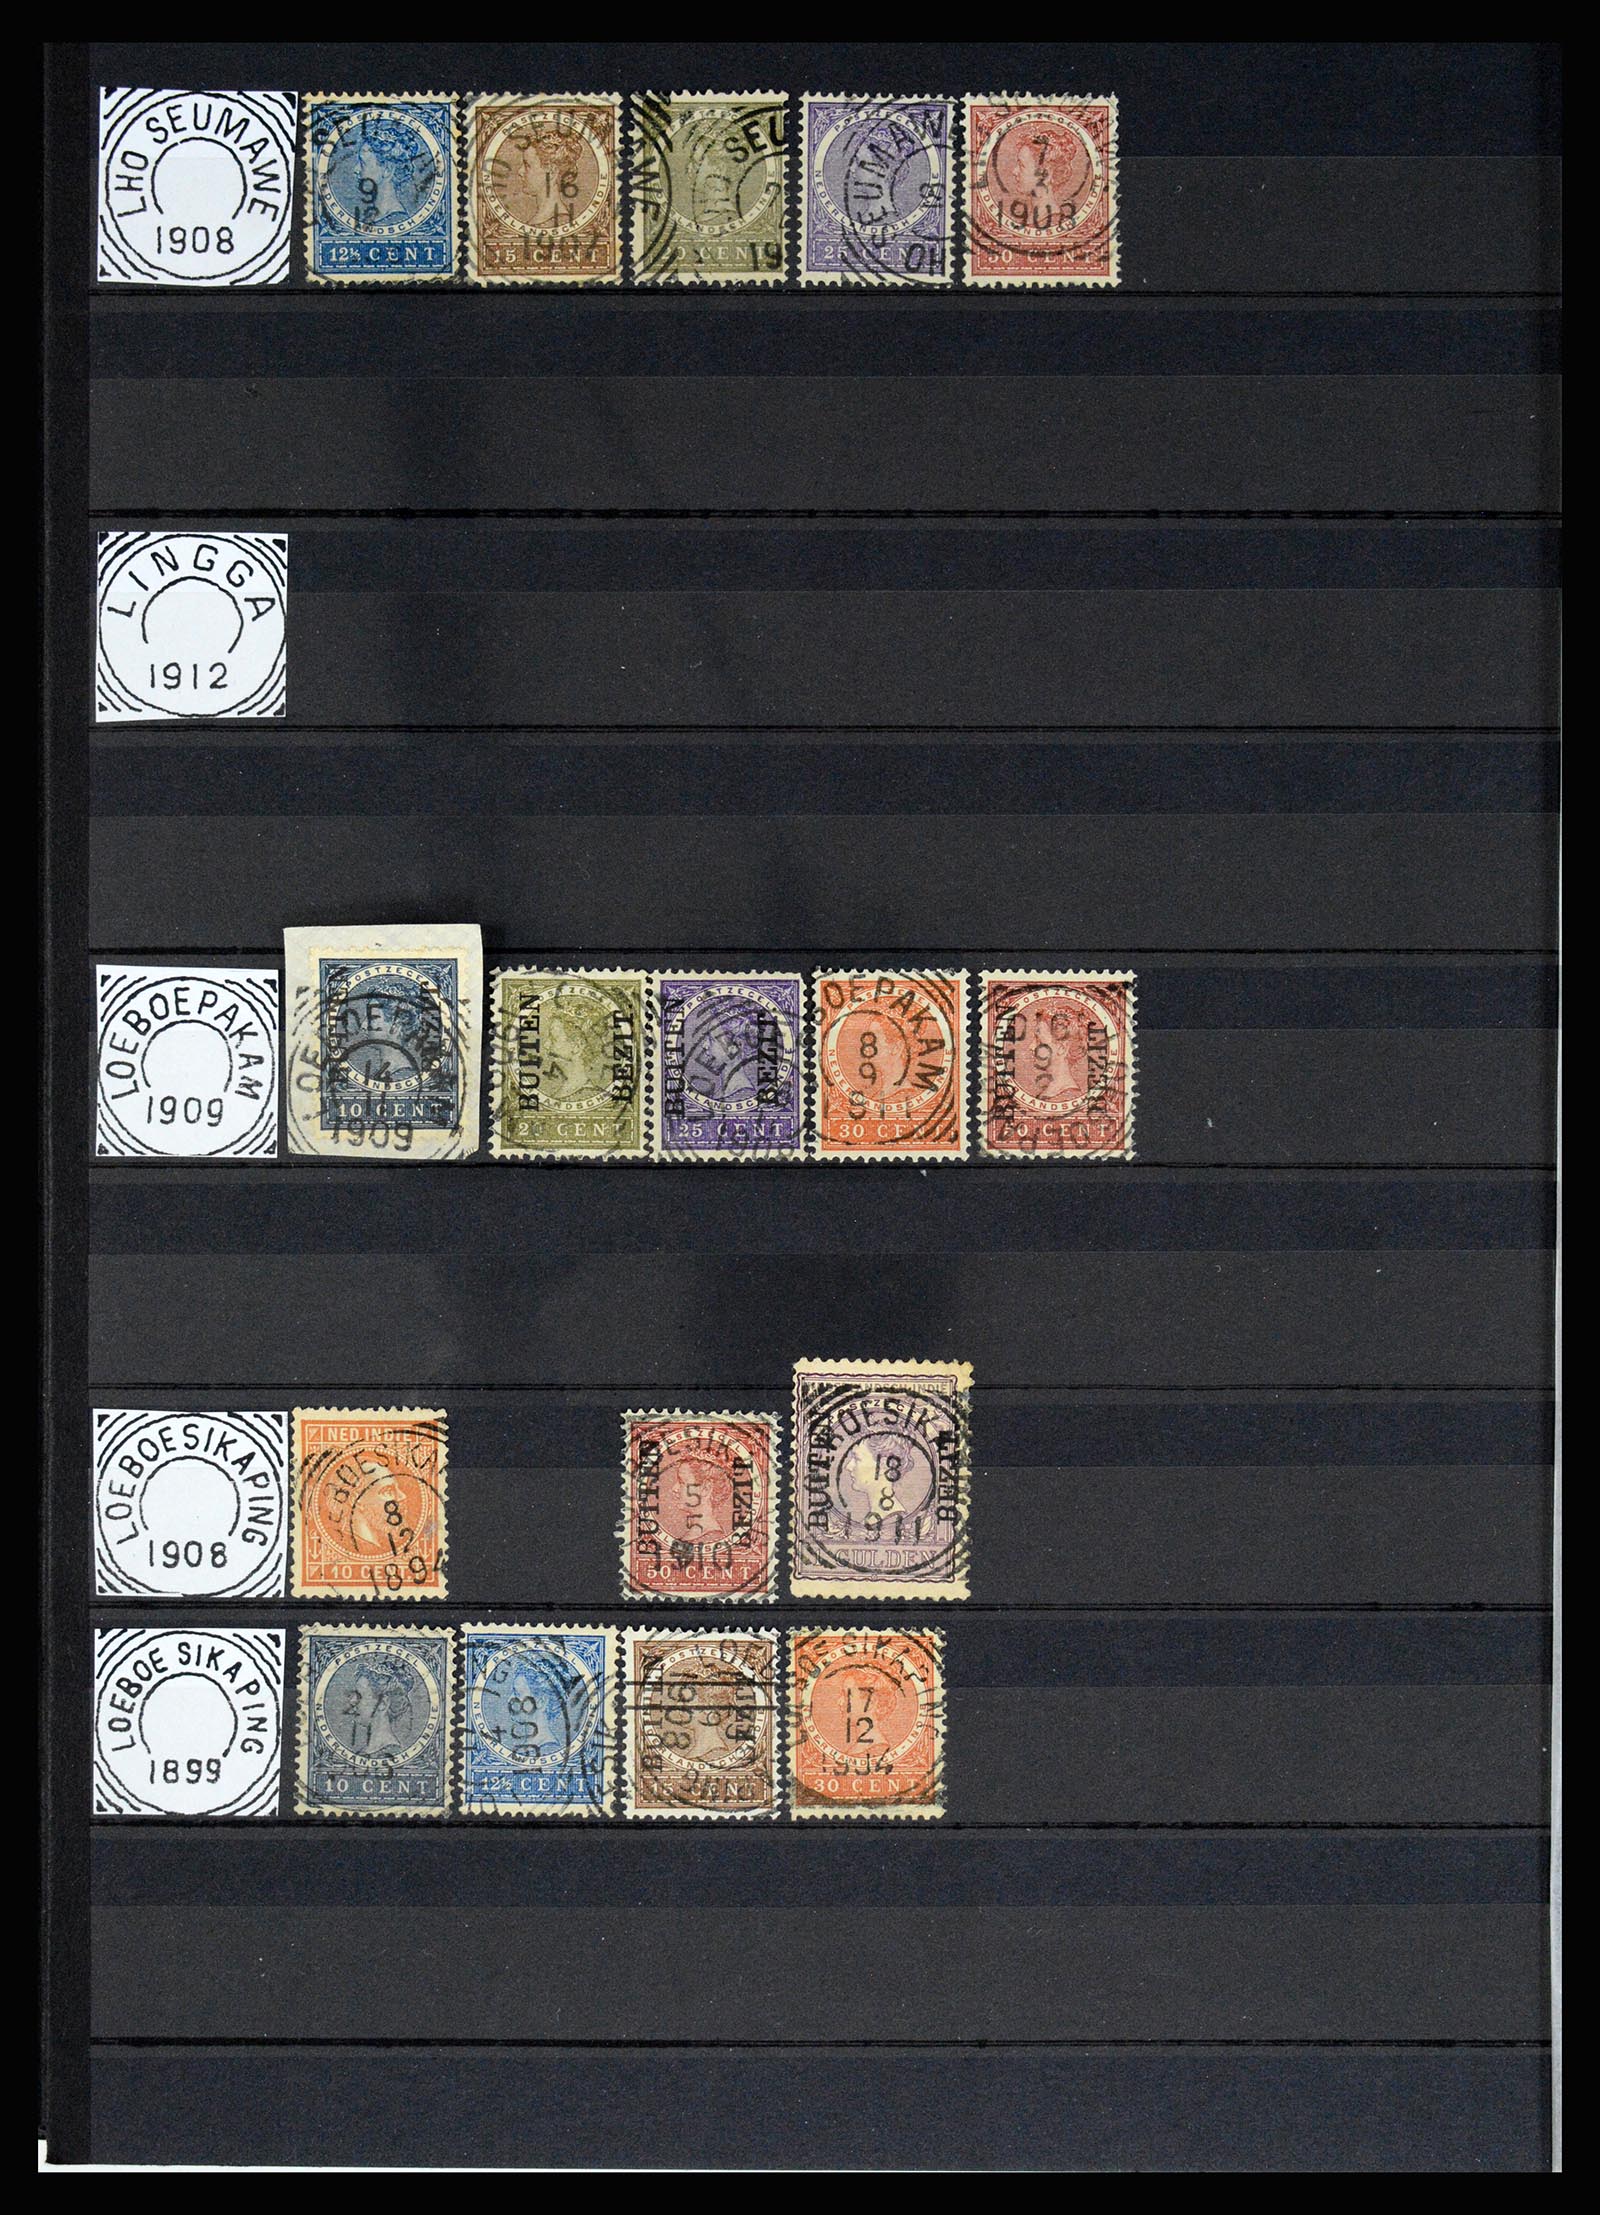 36839 025 - Stamp collection 36839 Dutch east Indies square cancels.